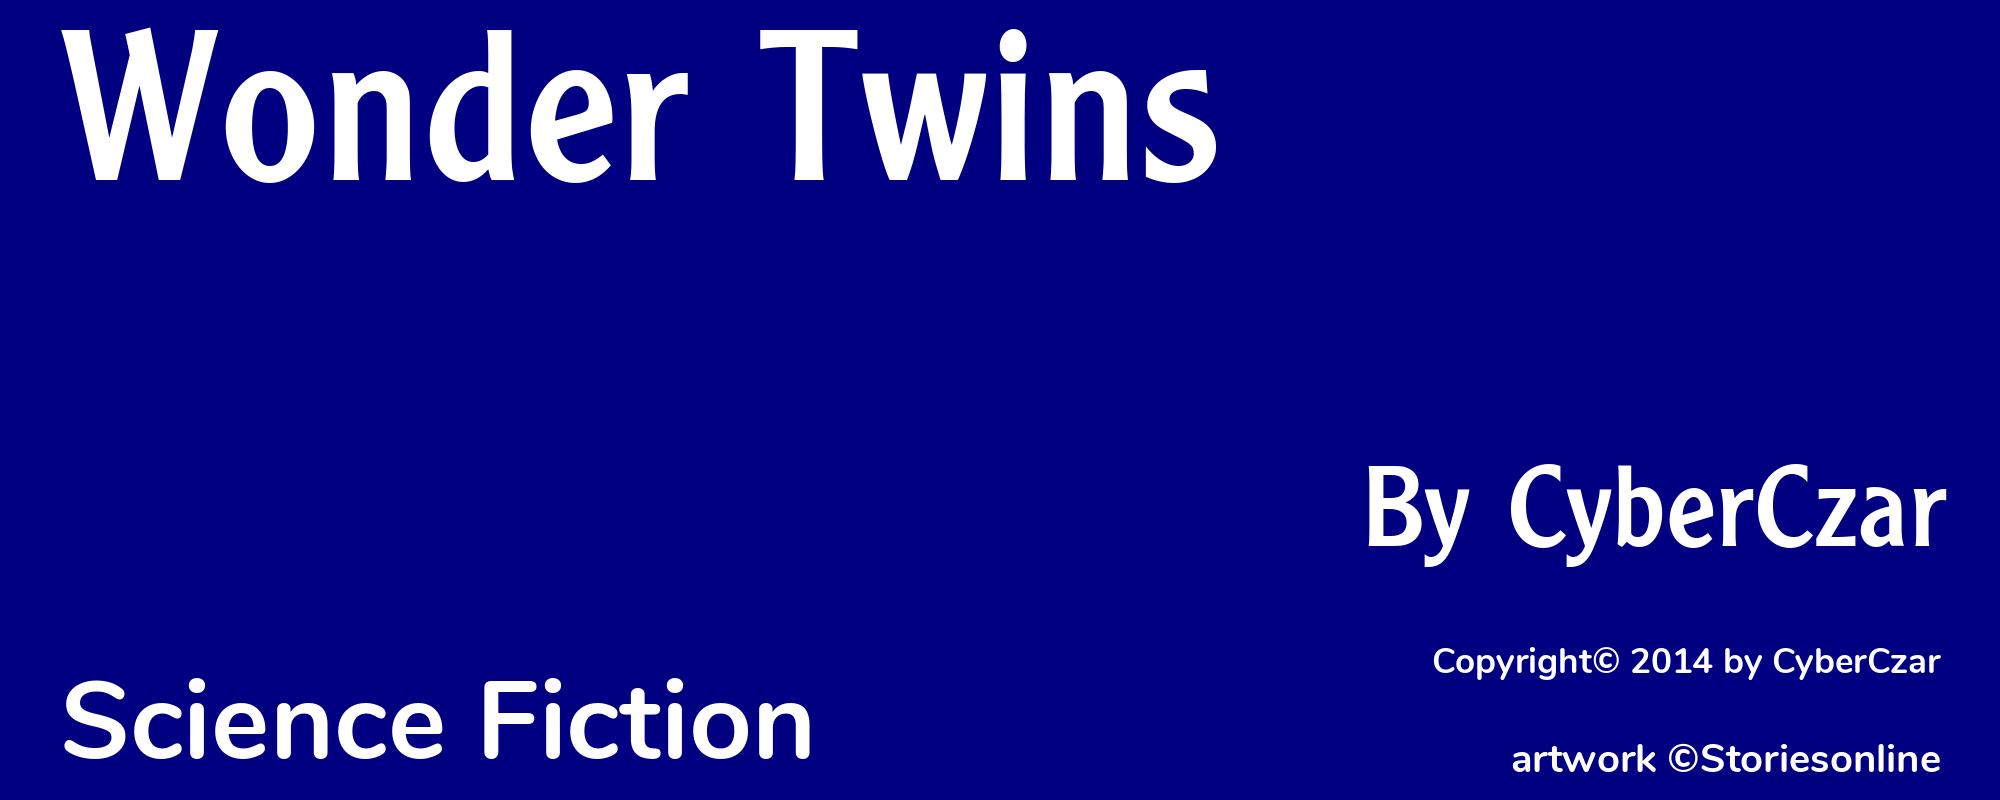 Wonder Twins - Cover